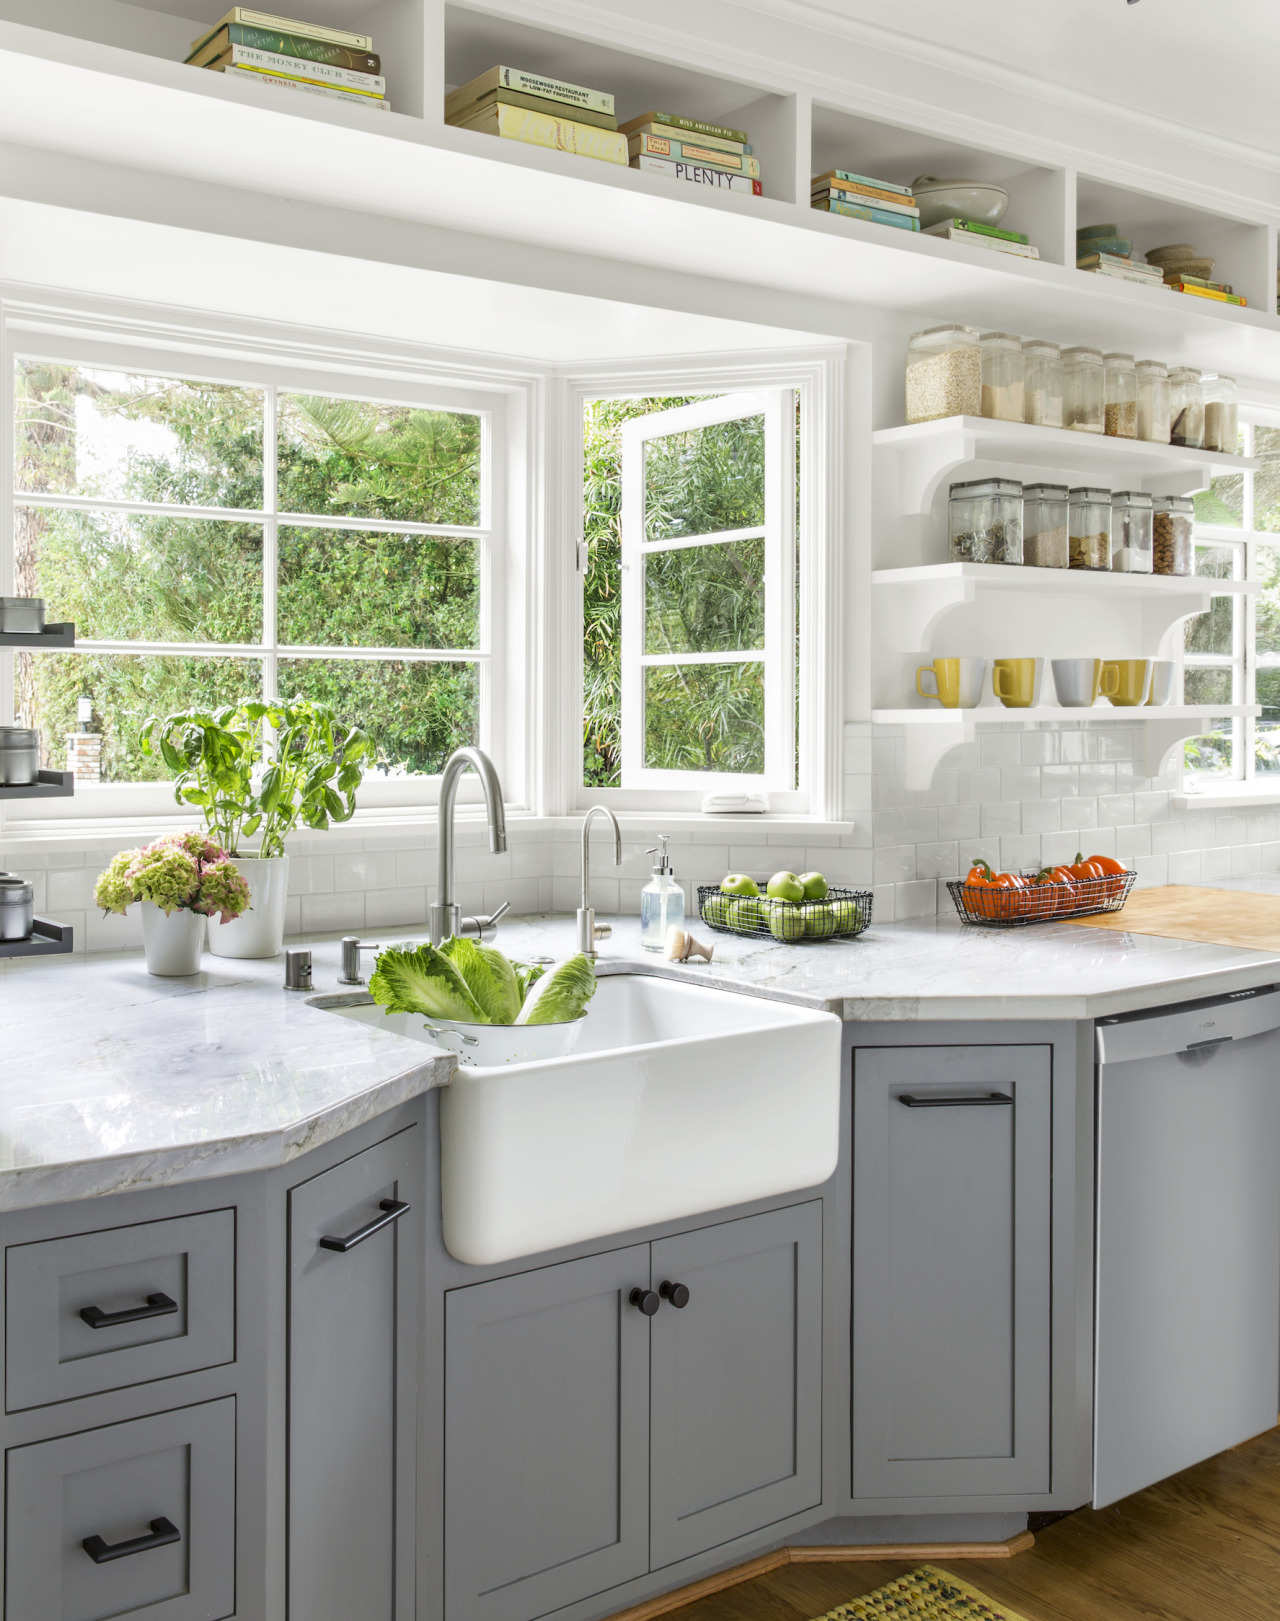 This Old House — thisoldhouse: KITCHEN DESIGN: Family Kitchen with...